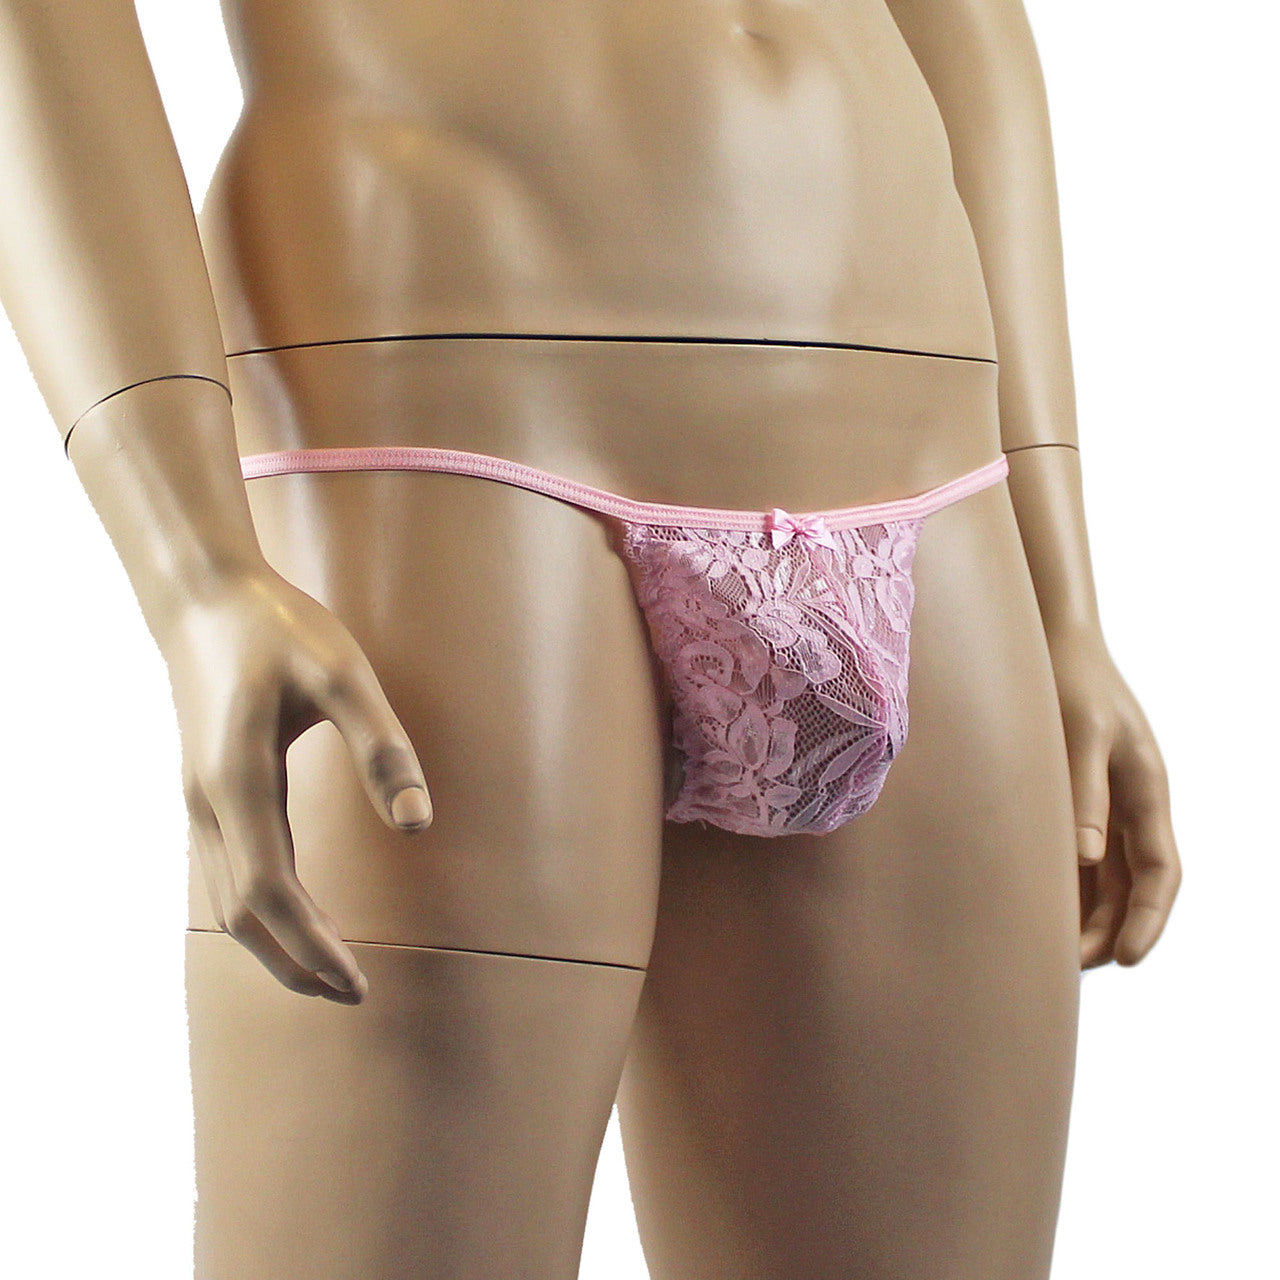 Mens Kristy Sexy Lace Pouch G string Panty Male Lingerie Light Pink